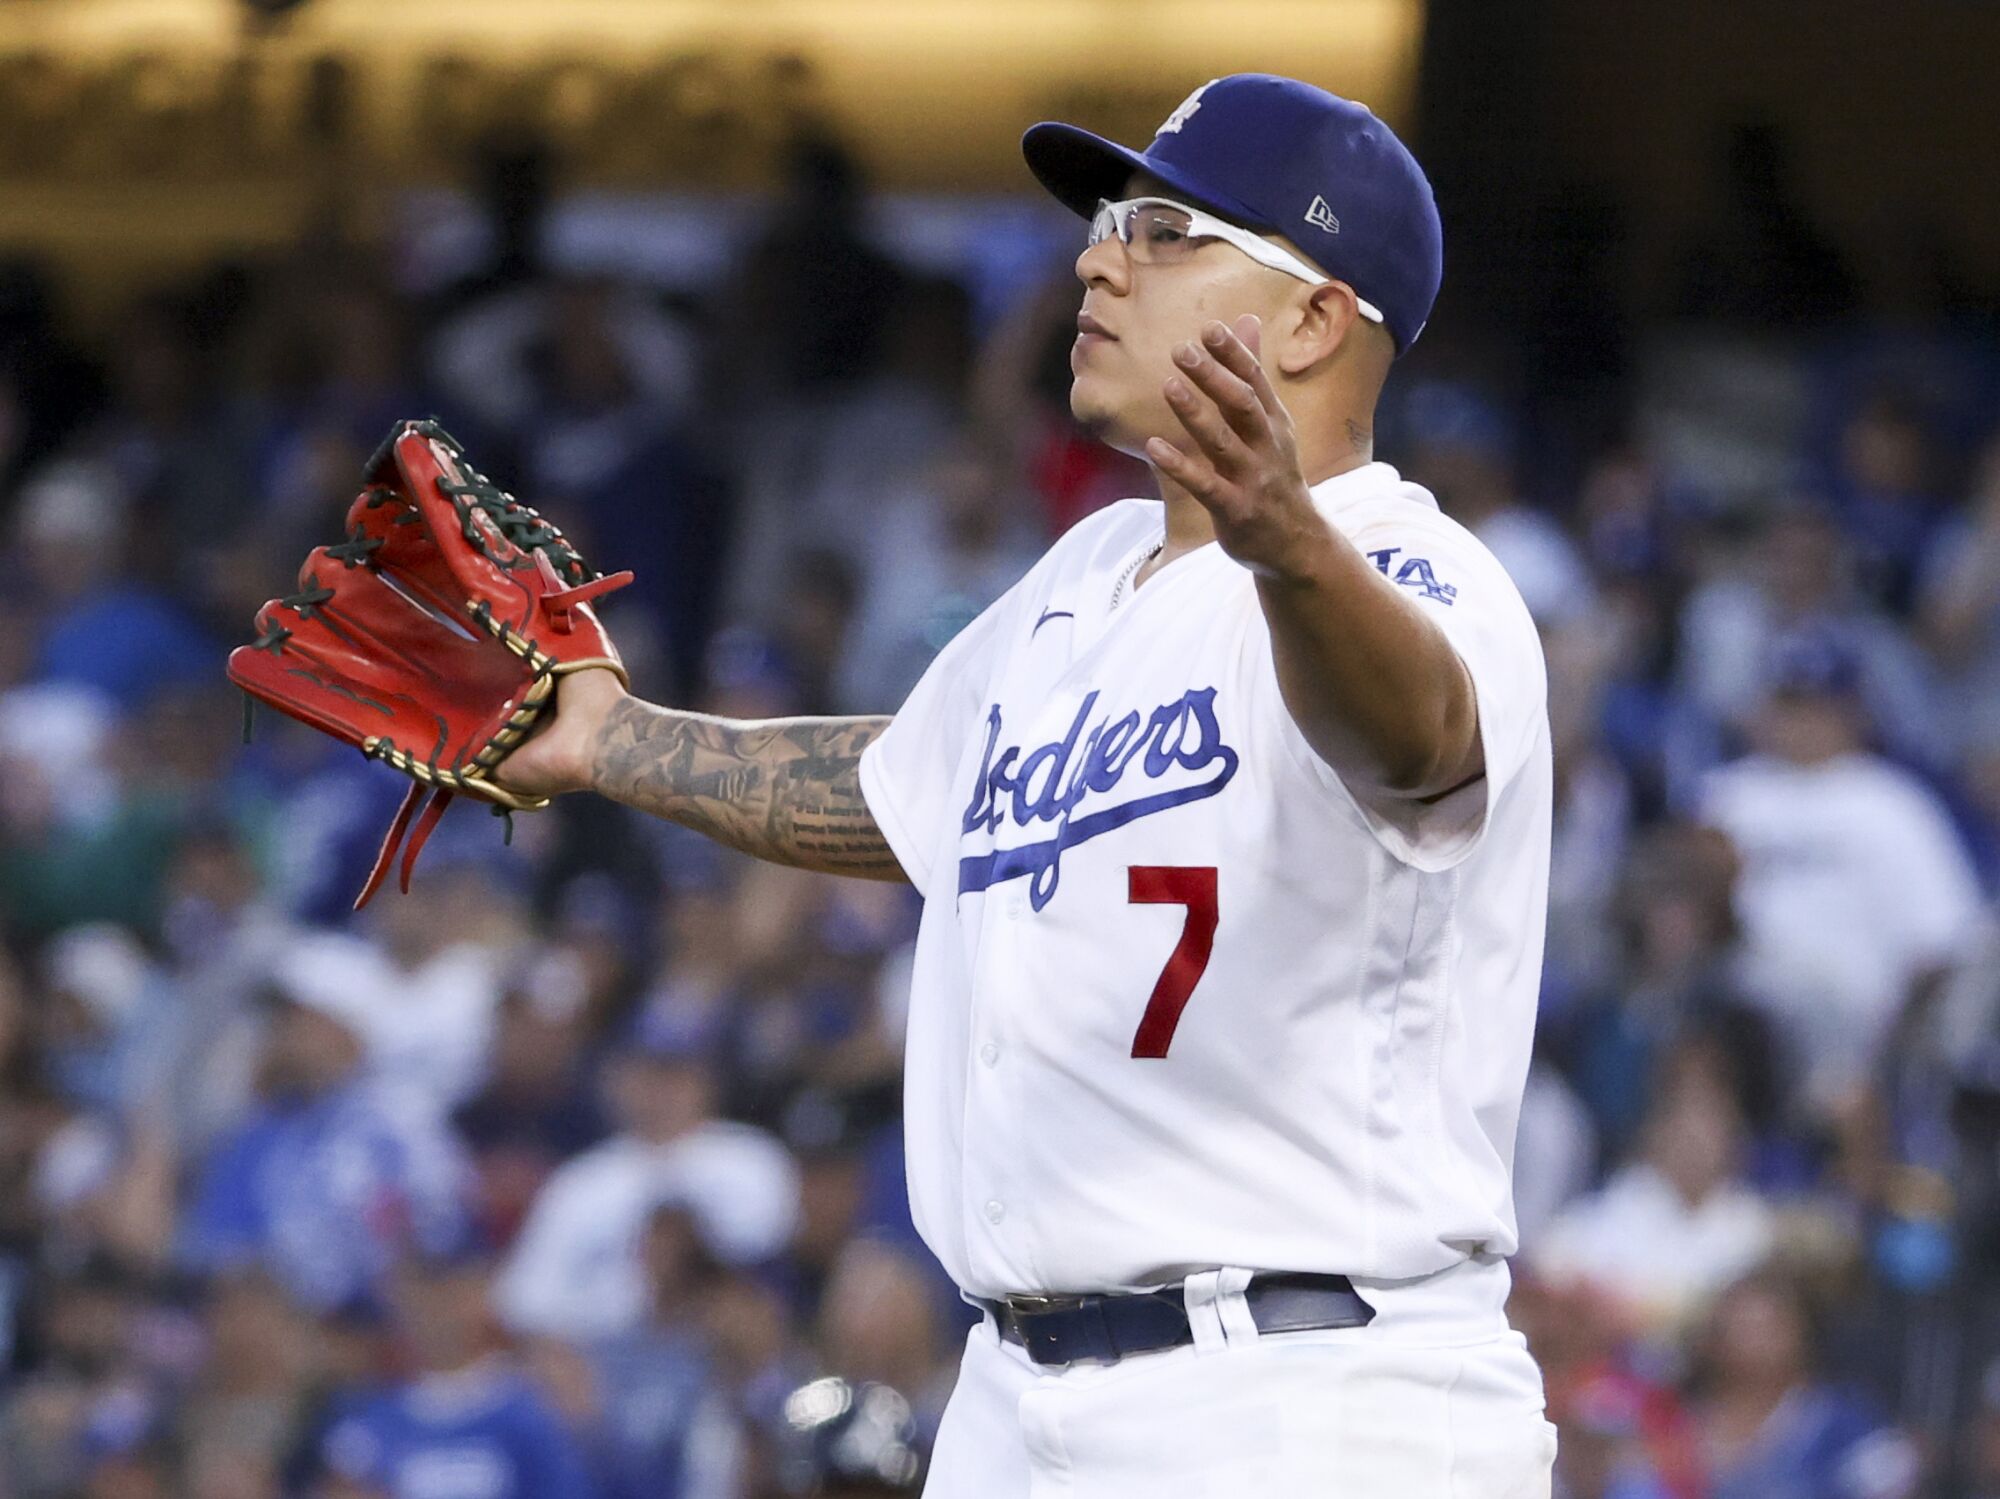  Dodgers pitcher Julio Urias reacts after an RBI single by Braves' Joc Pederson.